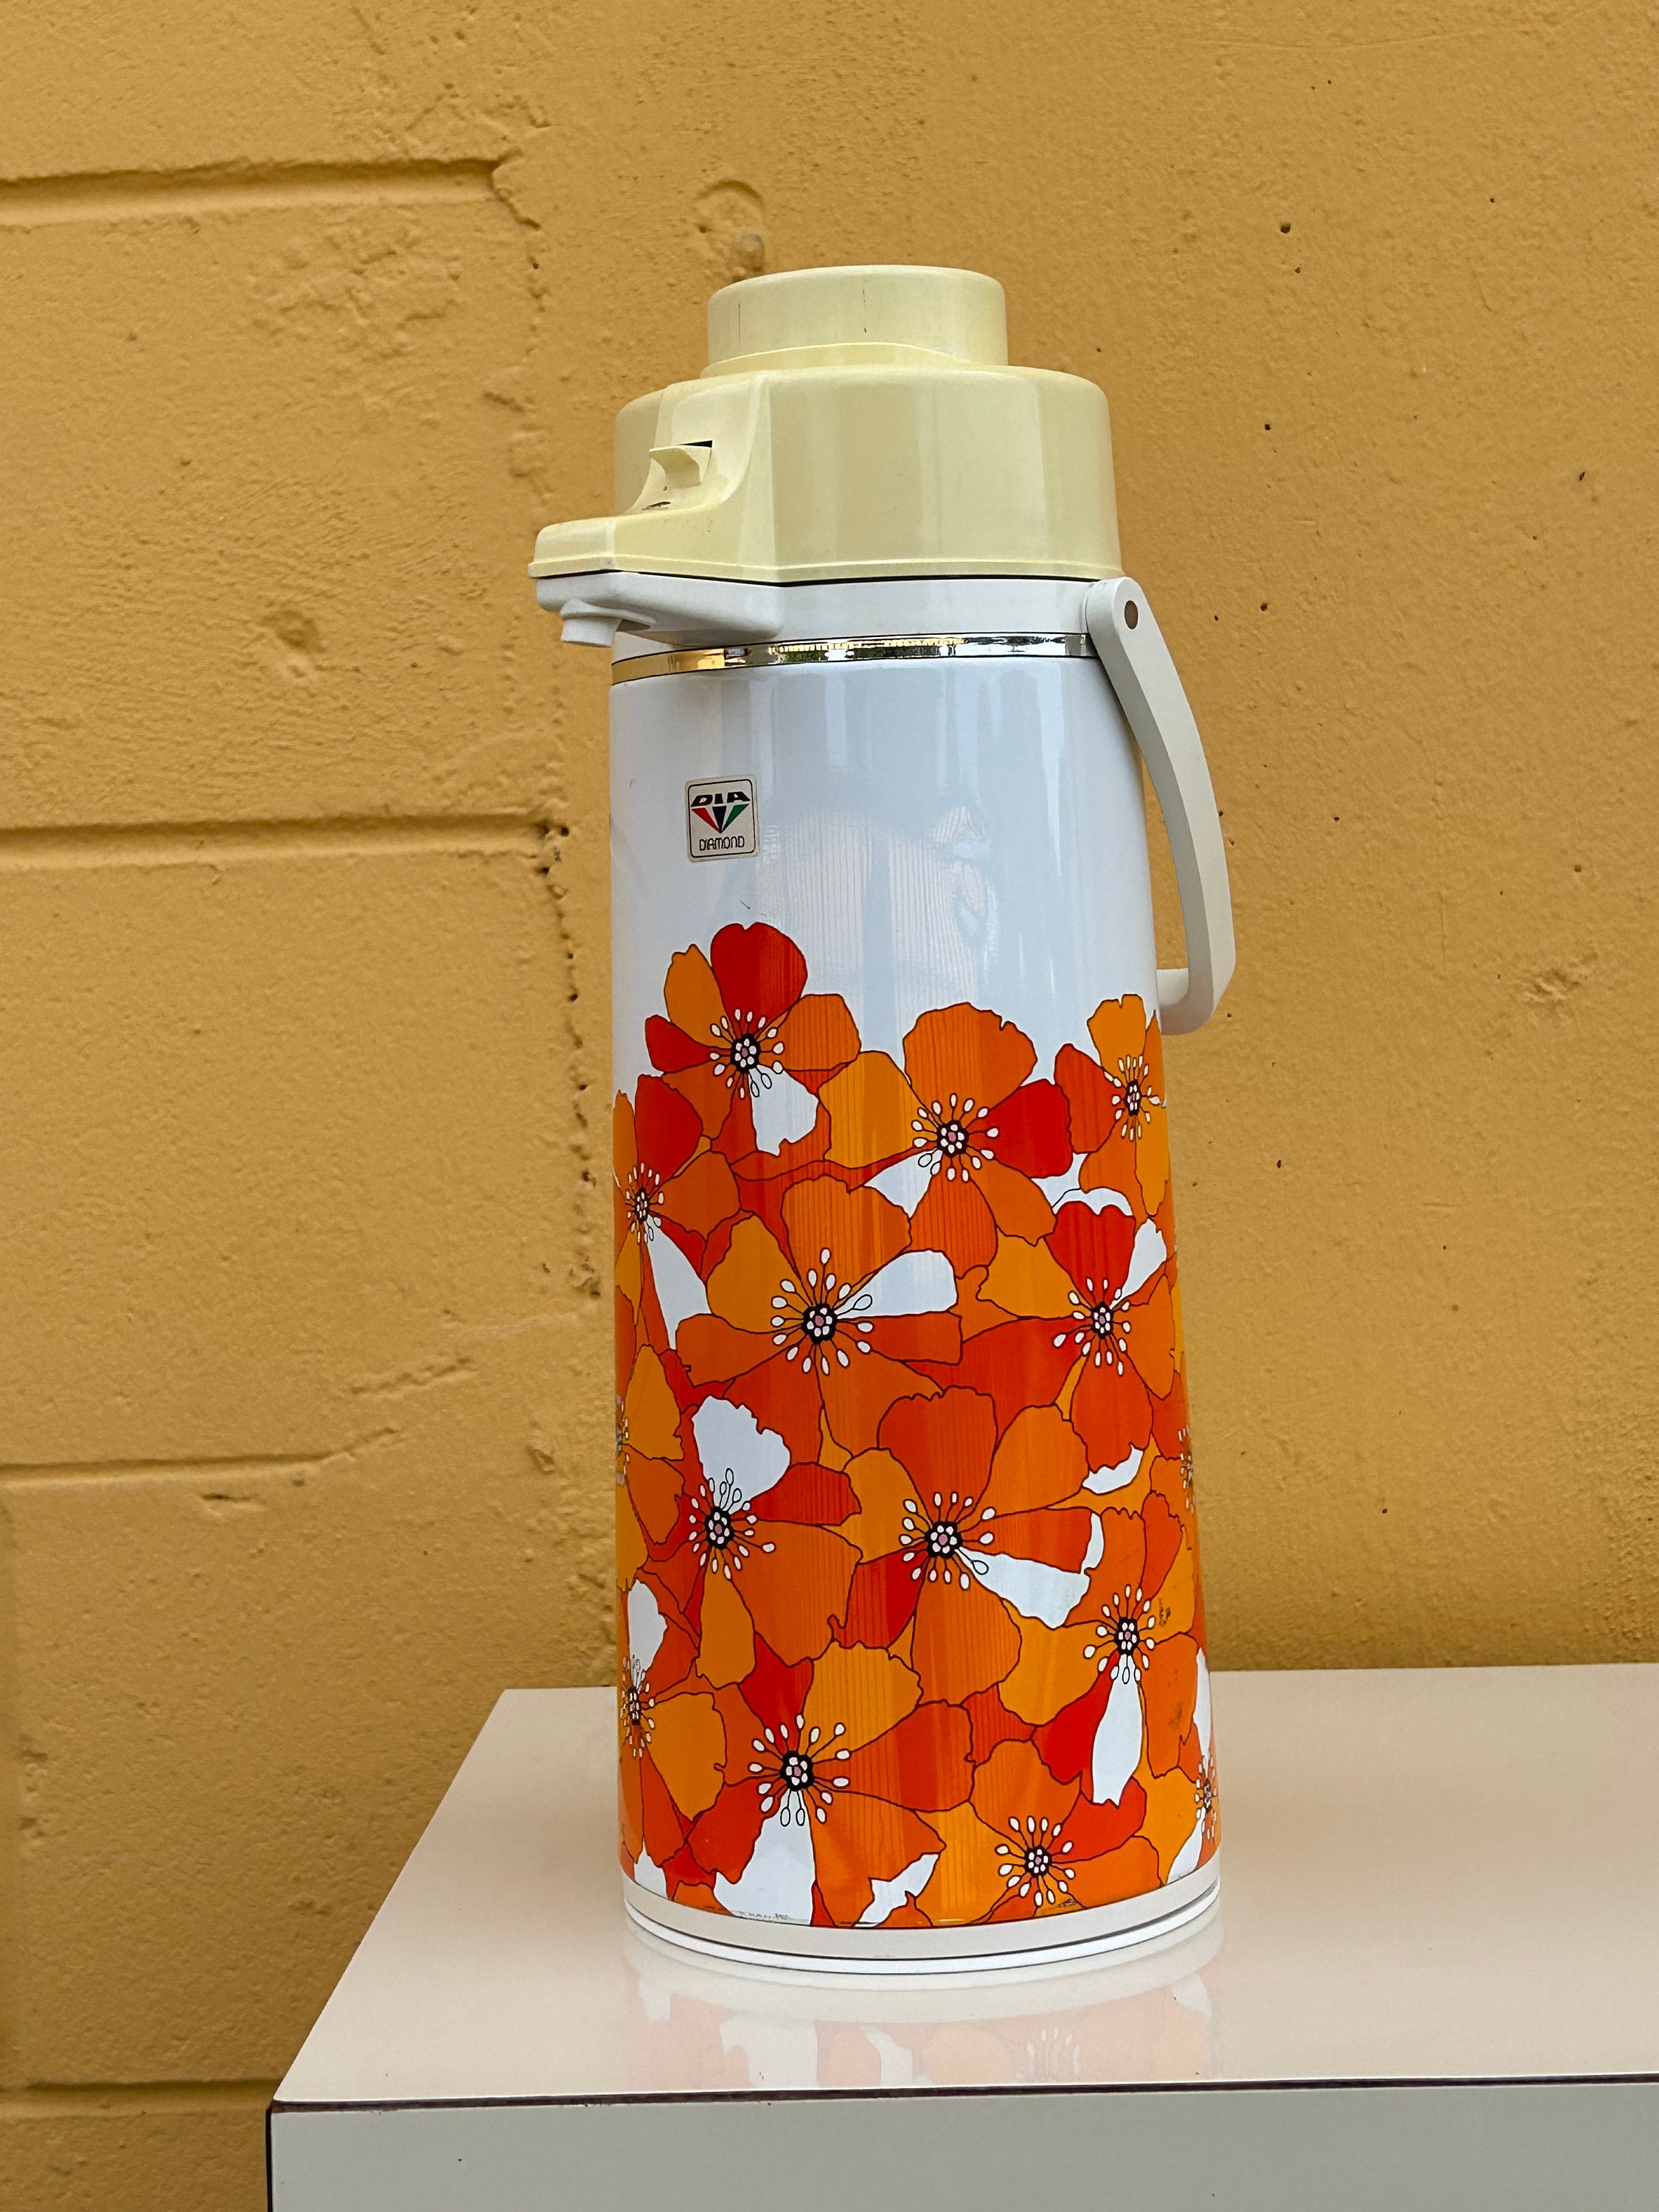 Vintage 1970s Thermos Drinks Dispenser for Hot or Cold Drinks 